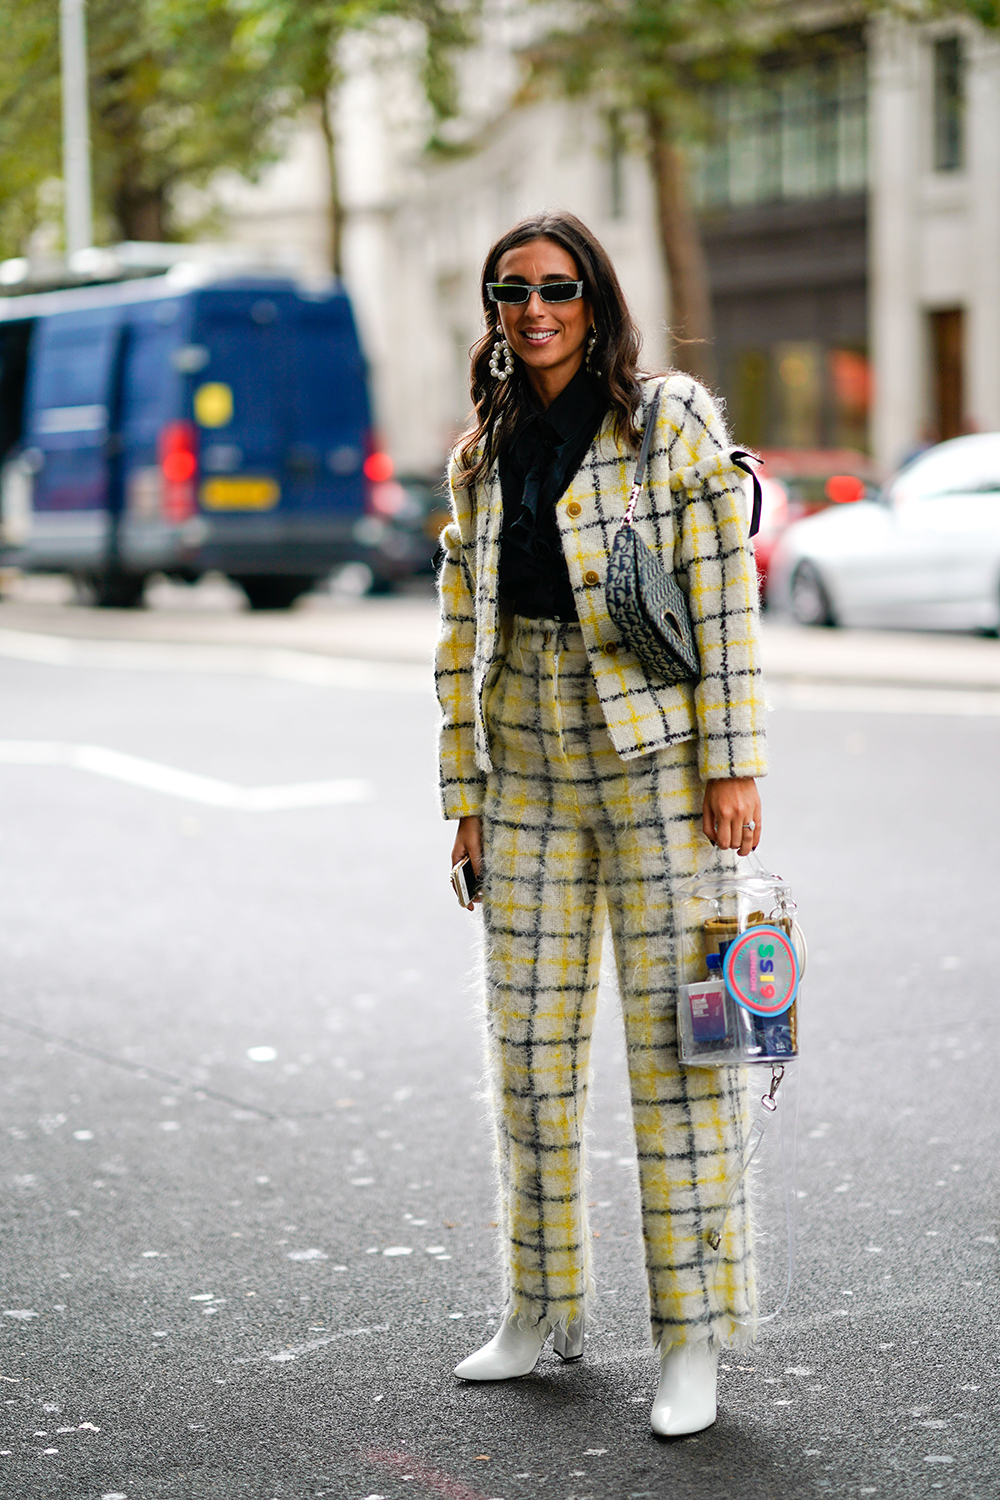 A guest wears a Dior bag, a yellow checked jacket pants, white shoes, during London Fashion Week September 2018 on September 14, 2018 in London, England. (Photo by Edward Berthelot/Getty Images)